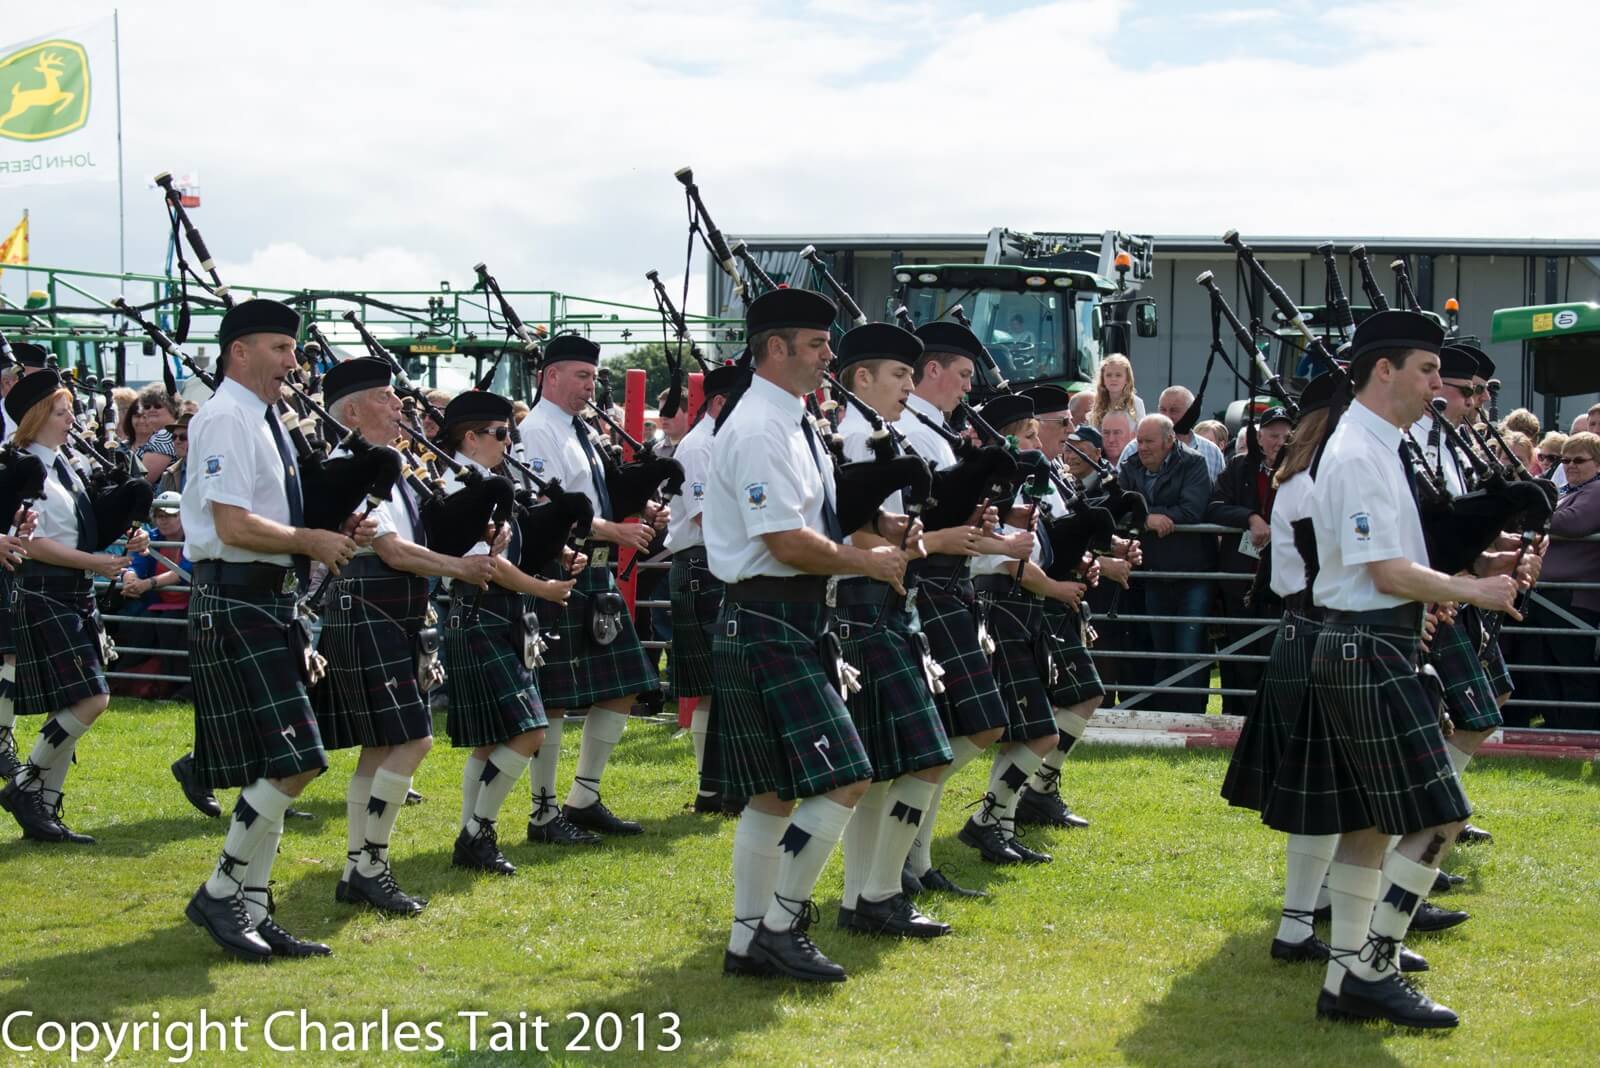 Kirkwall City Pipe Band at the County Show - photo by Charles Tait